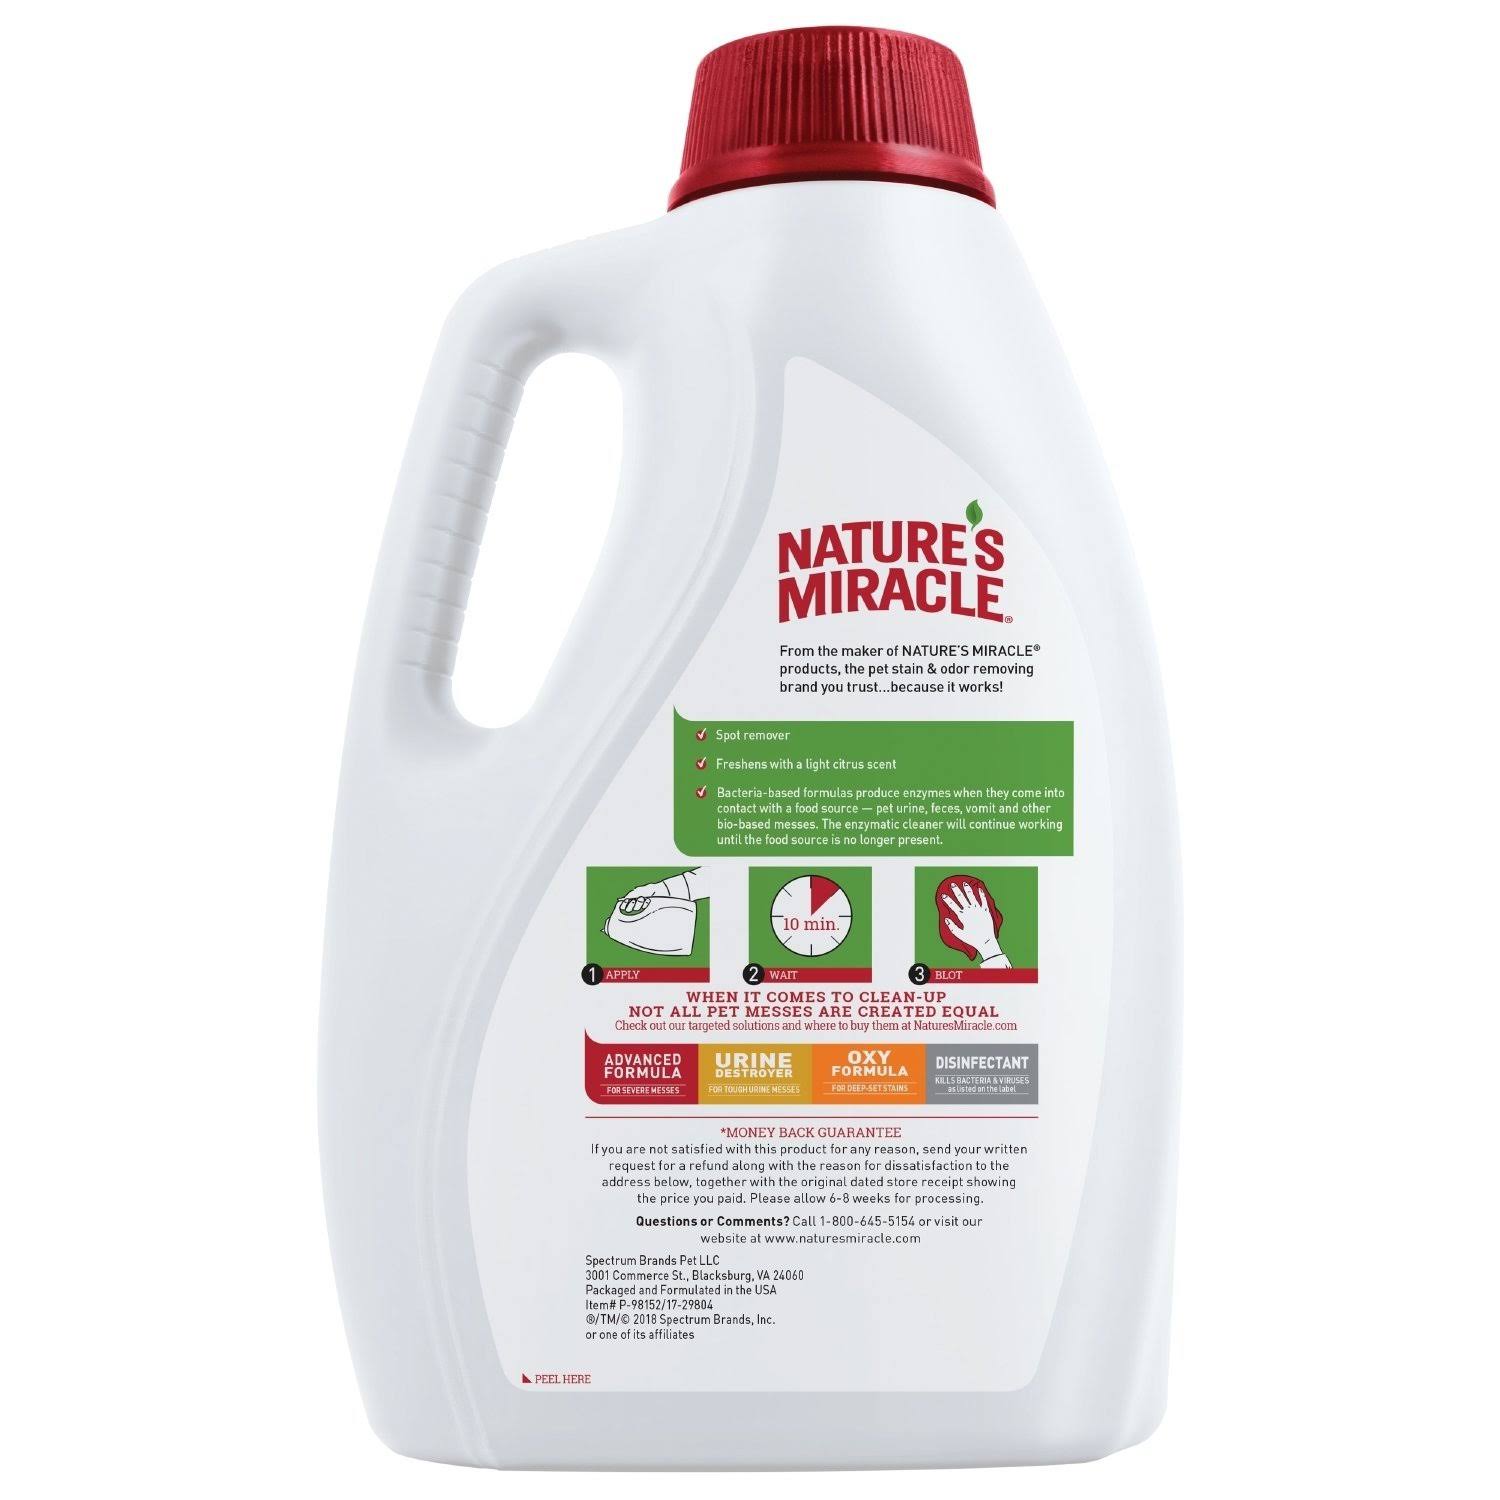 Natures Miracle Stain and Odor Remover - 1gal